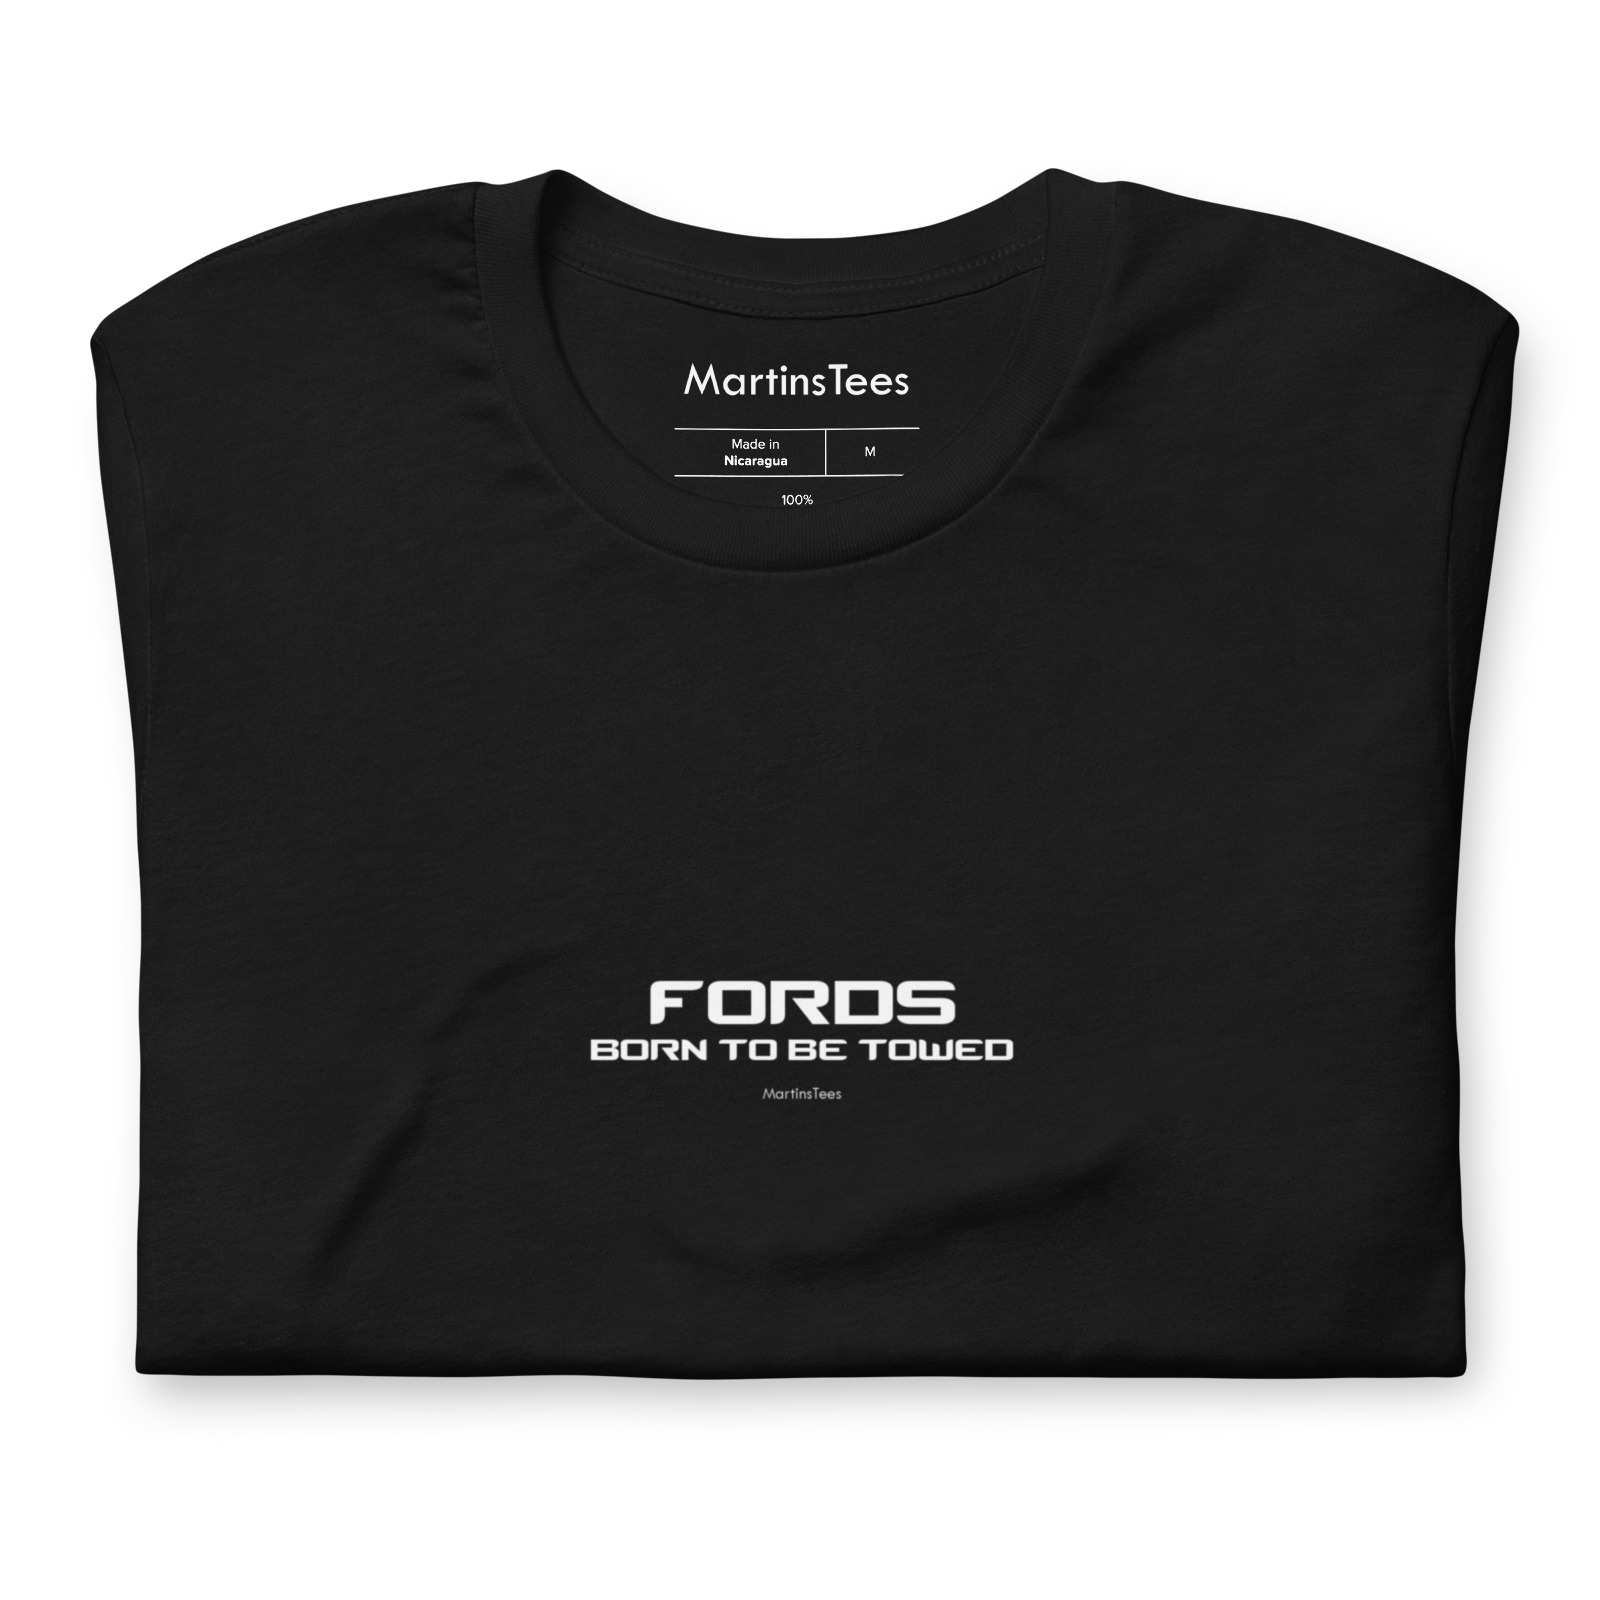 T-shirt: FORDS - BORN TO BE TOWED